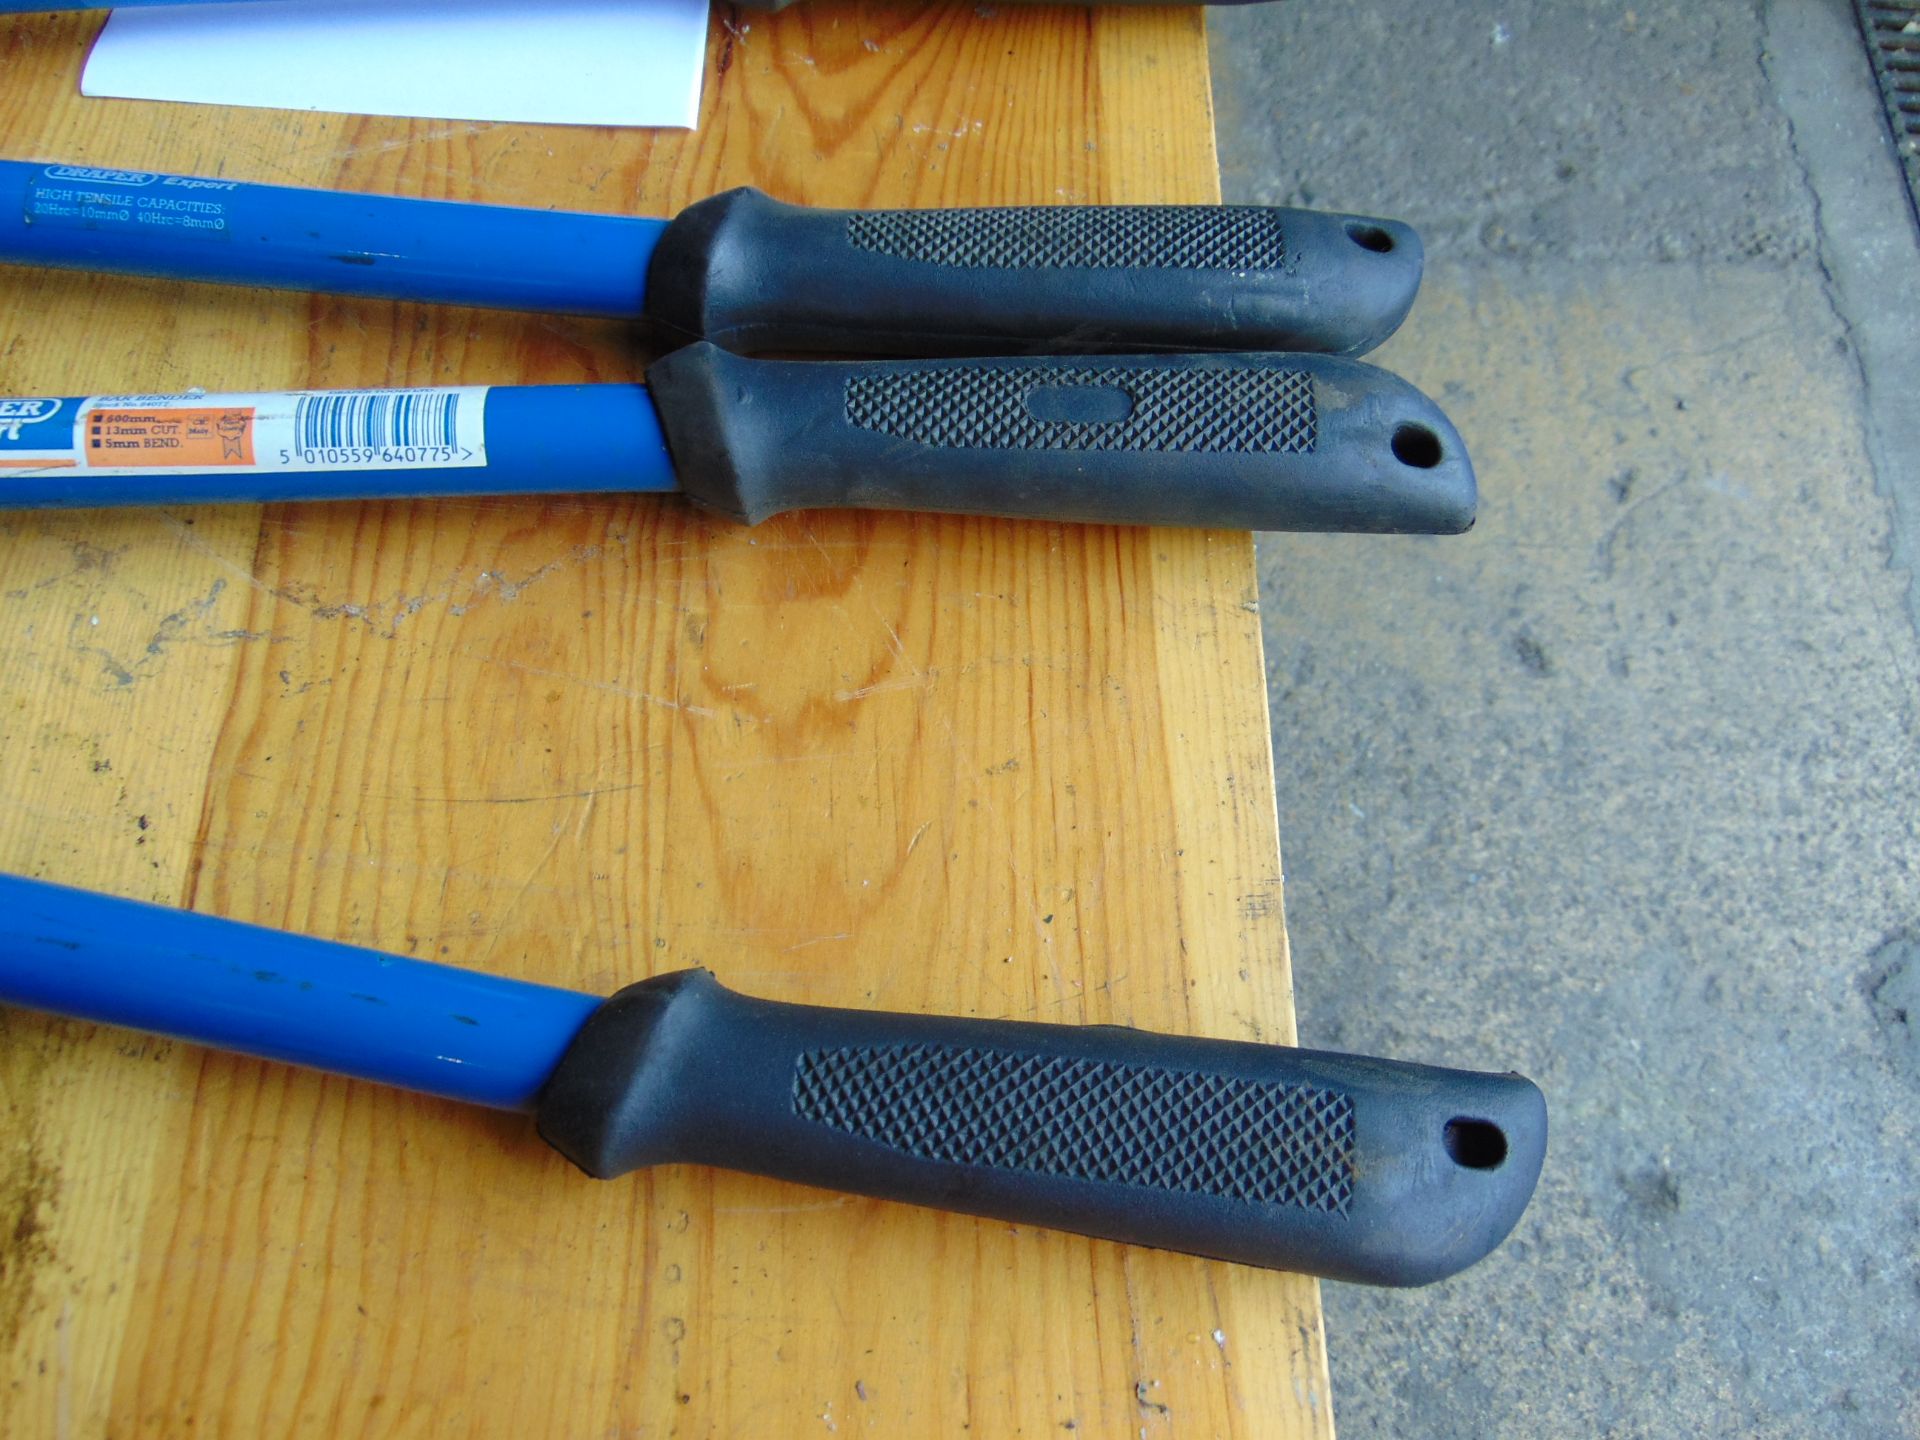 2 x New Unissued 600mm 24inch Bolt Croppers - Image 6 of 6